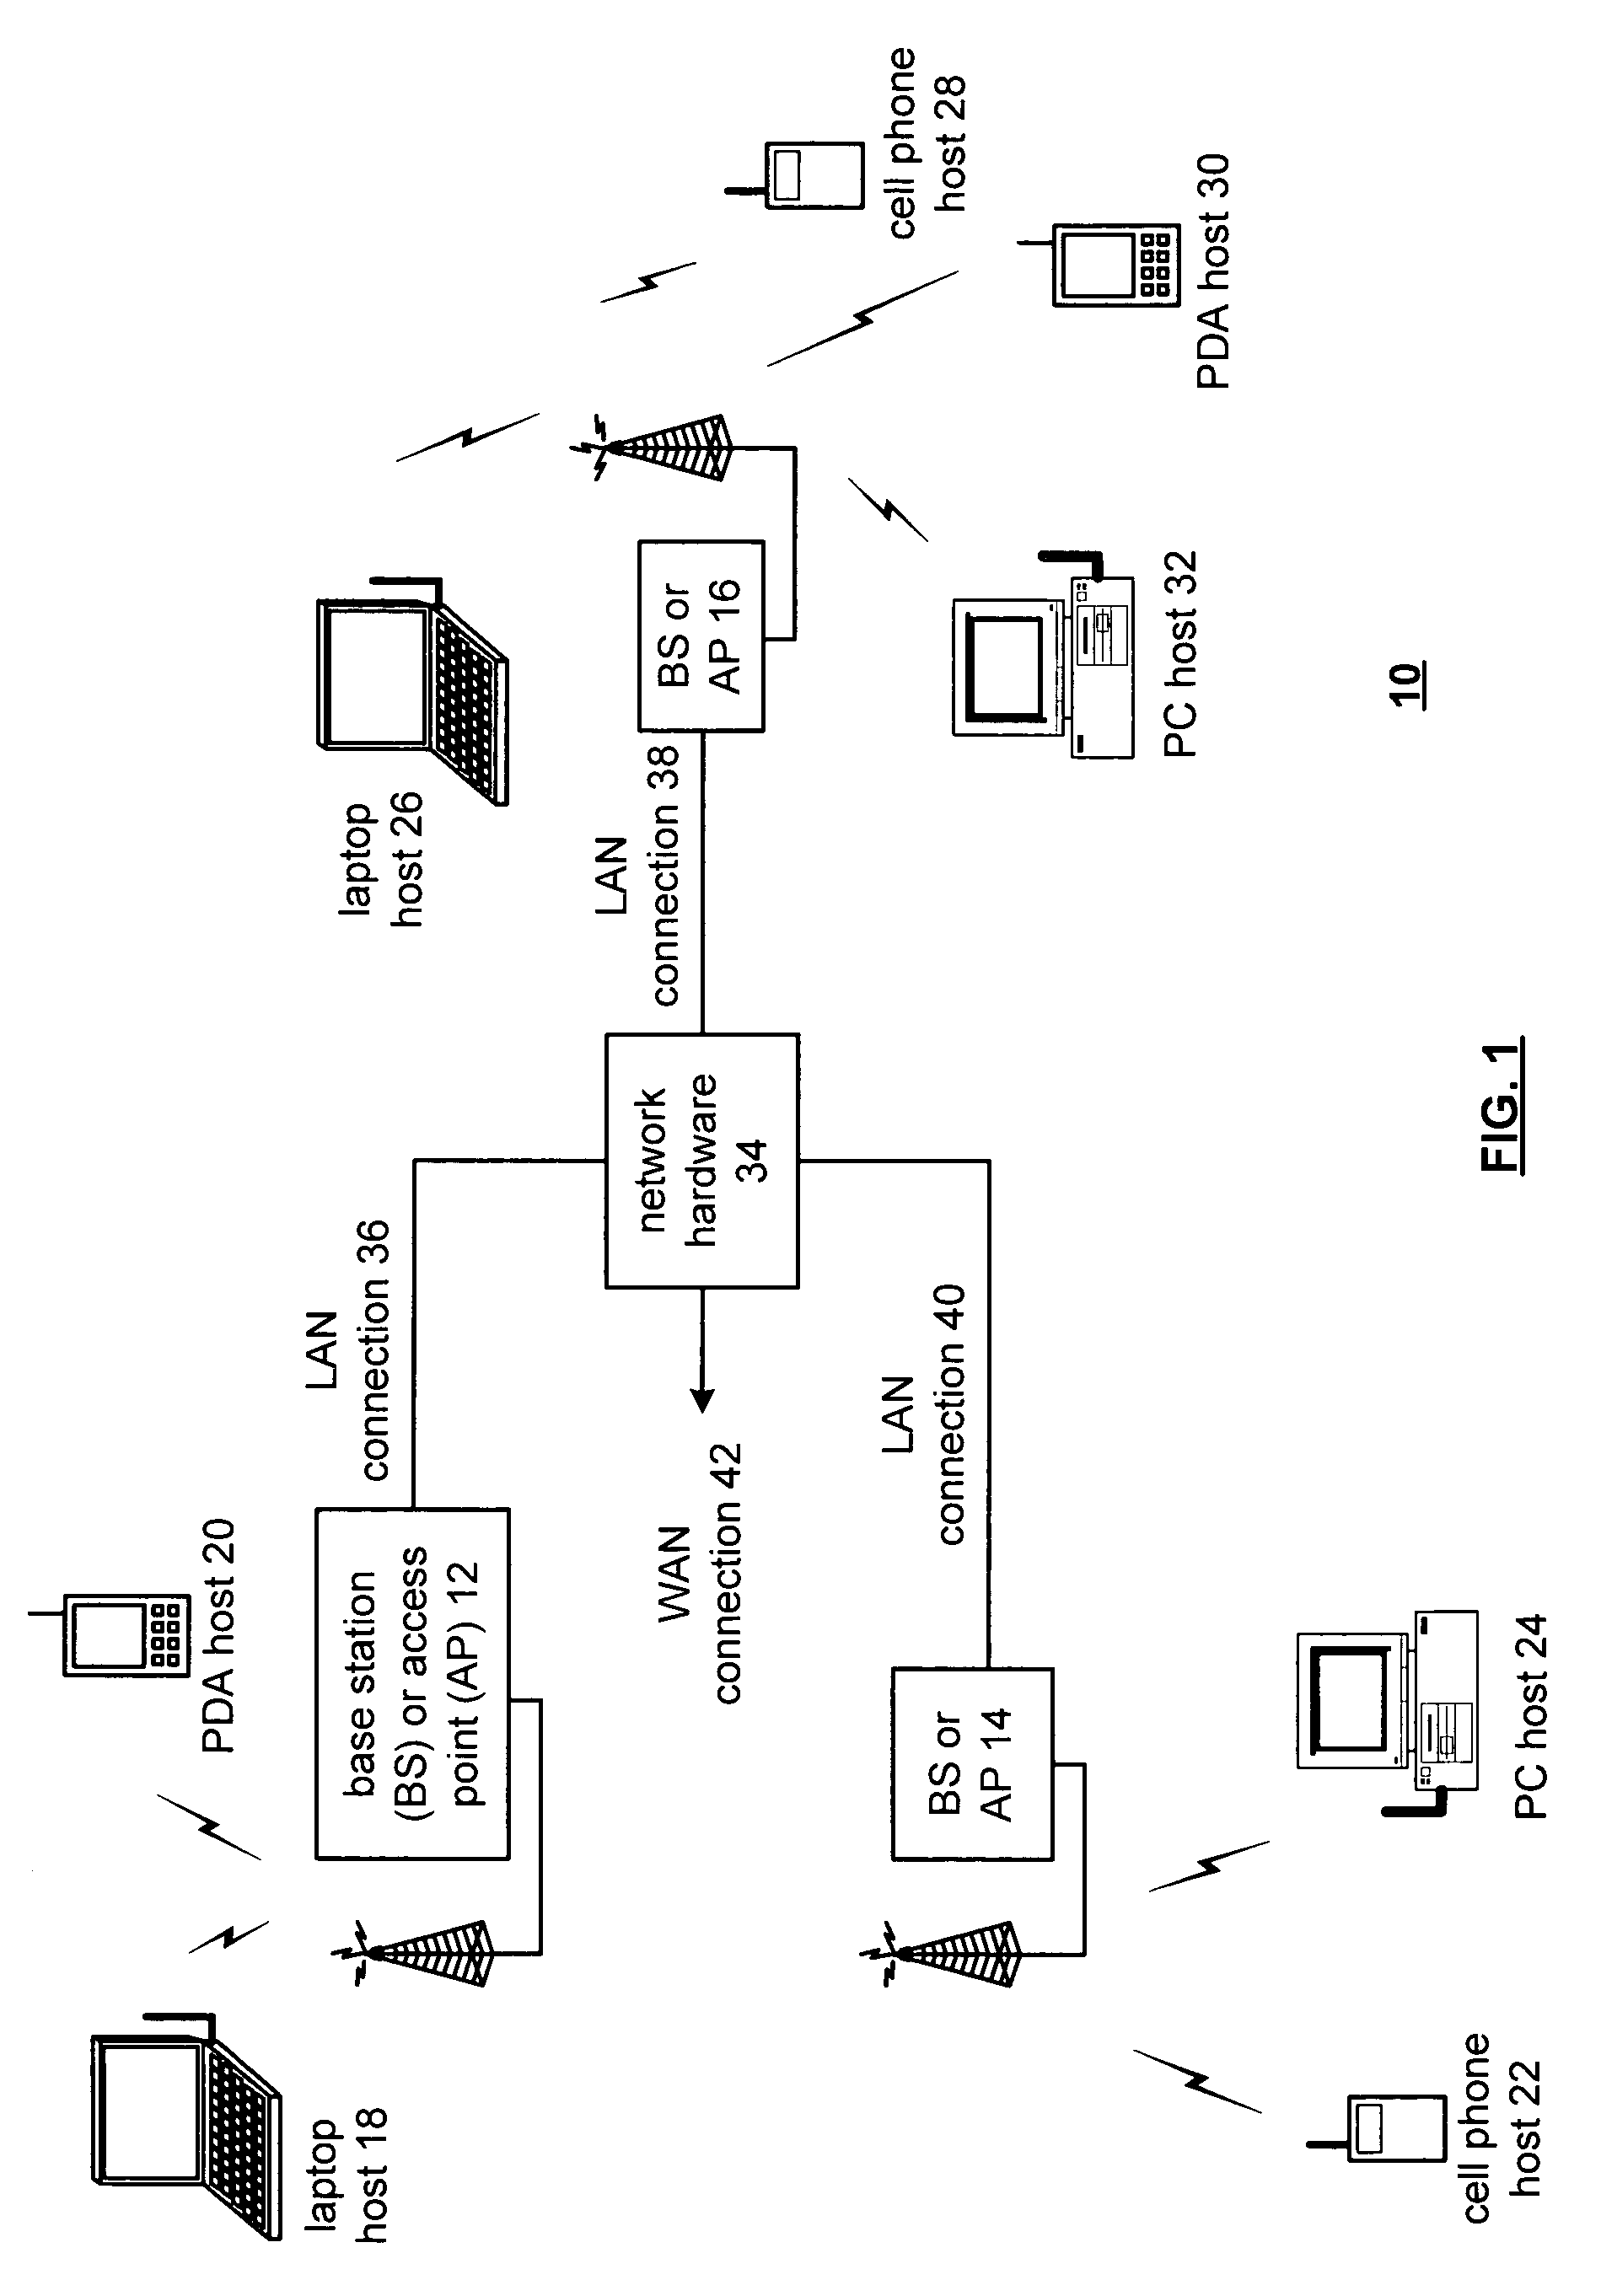 Configurable spectral mask for use in a high data throughput wireless communication